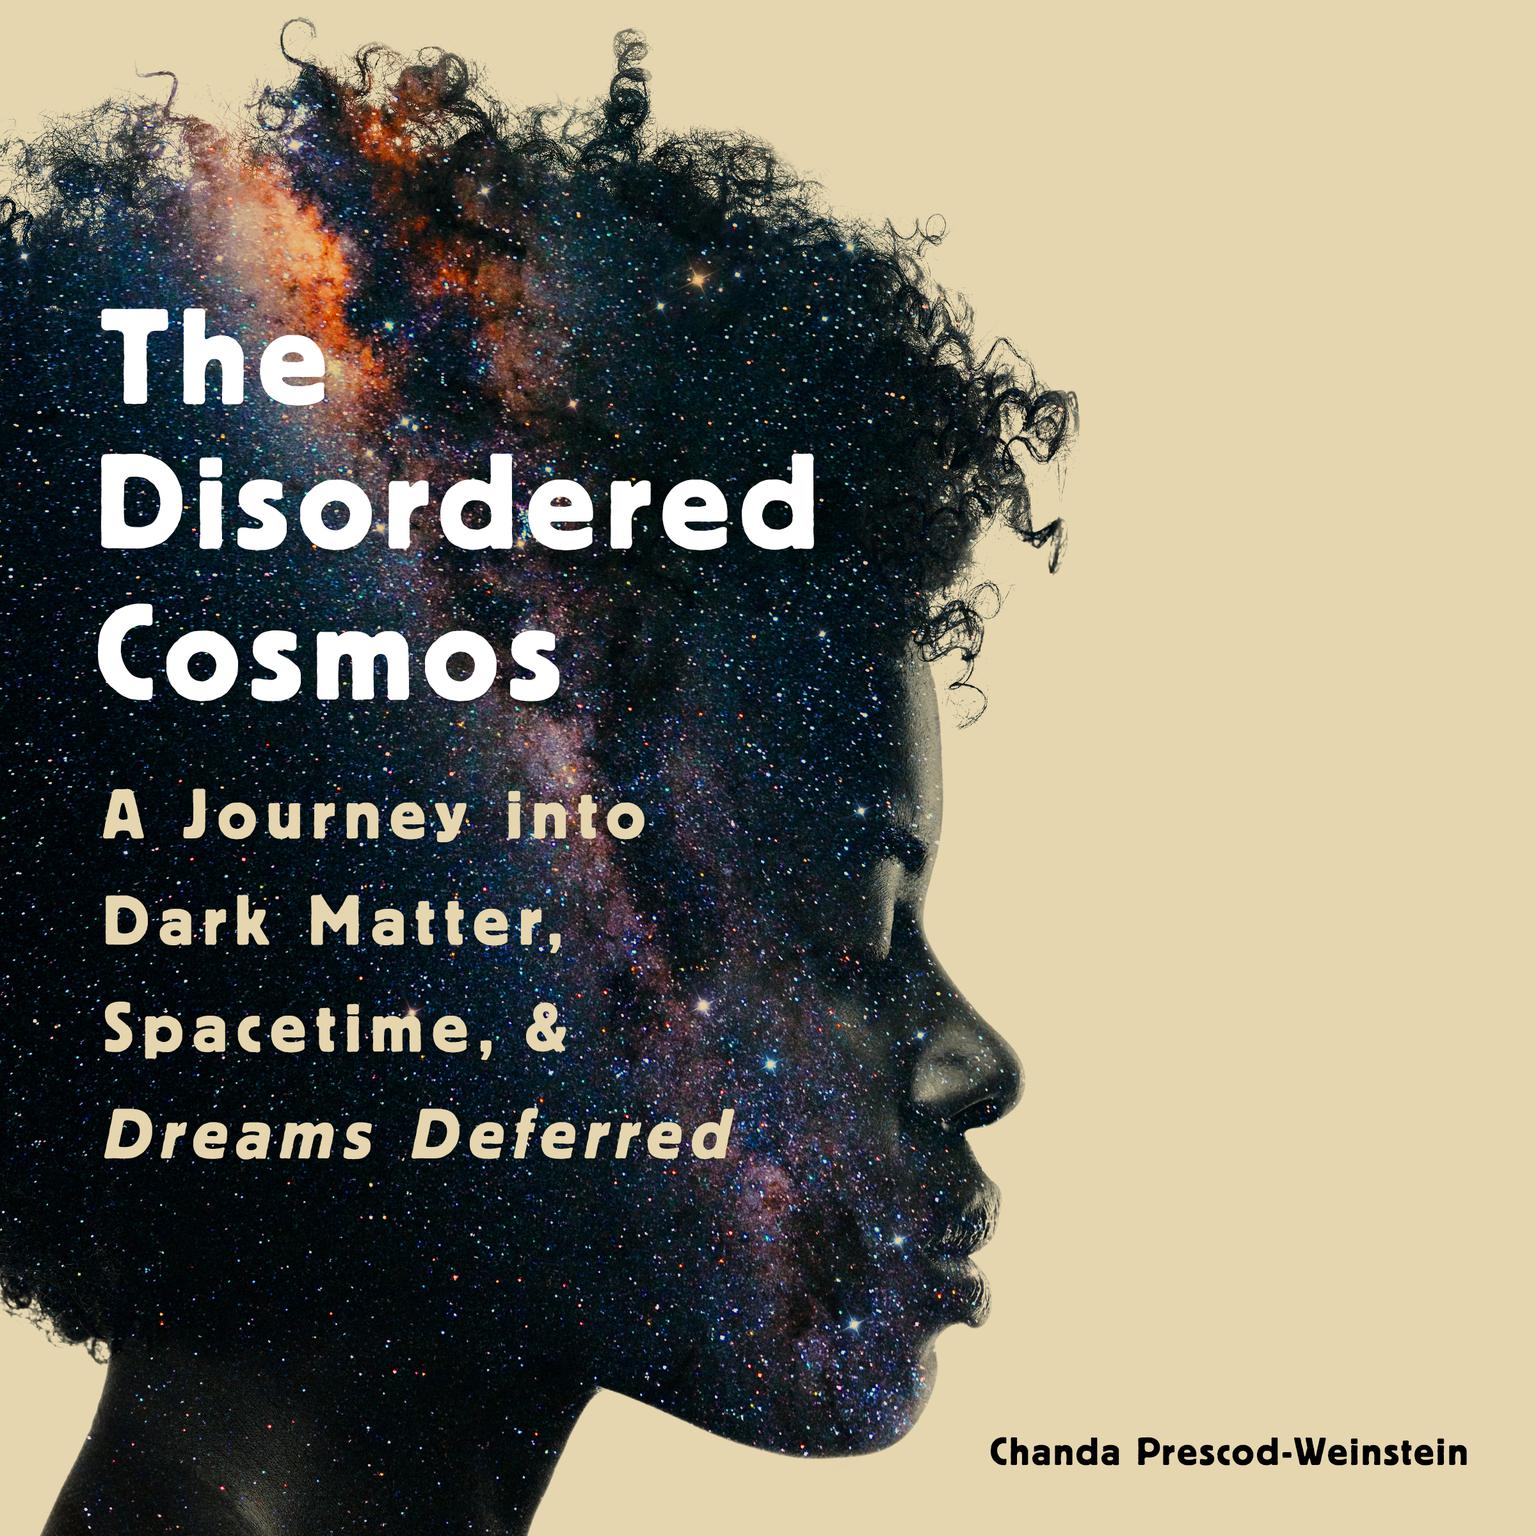 The Disordered Cosmos: A Journey into Dark Matter, Spacetime, and Dreams Deferred Audiobook, by Chanda Prescod-Weinstein